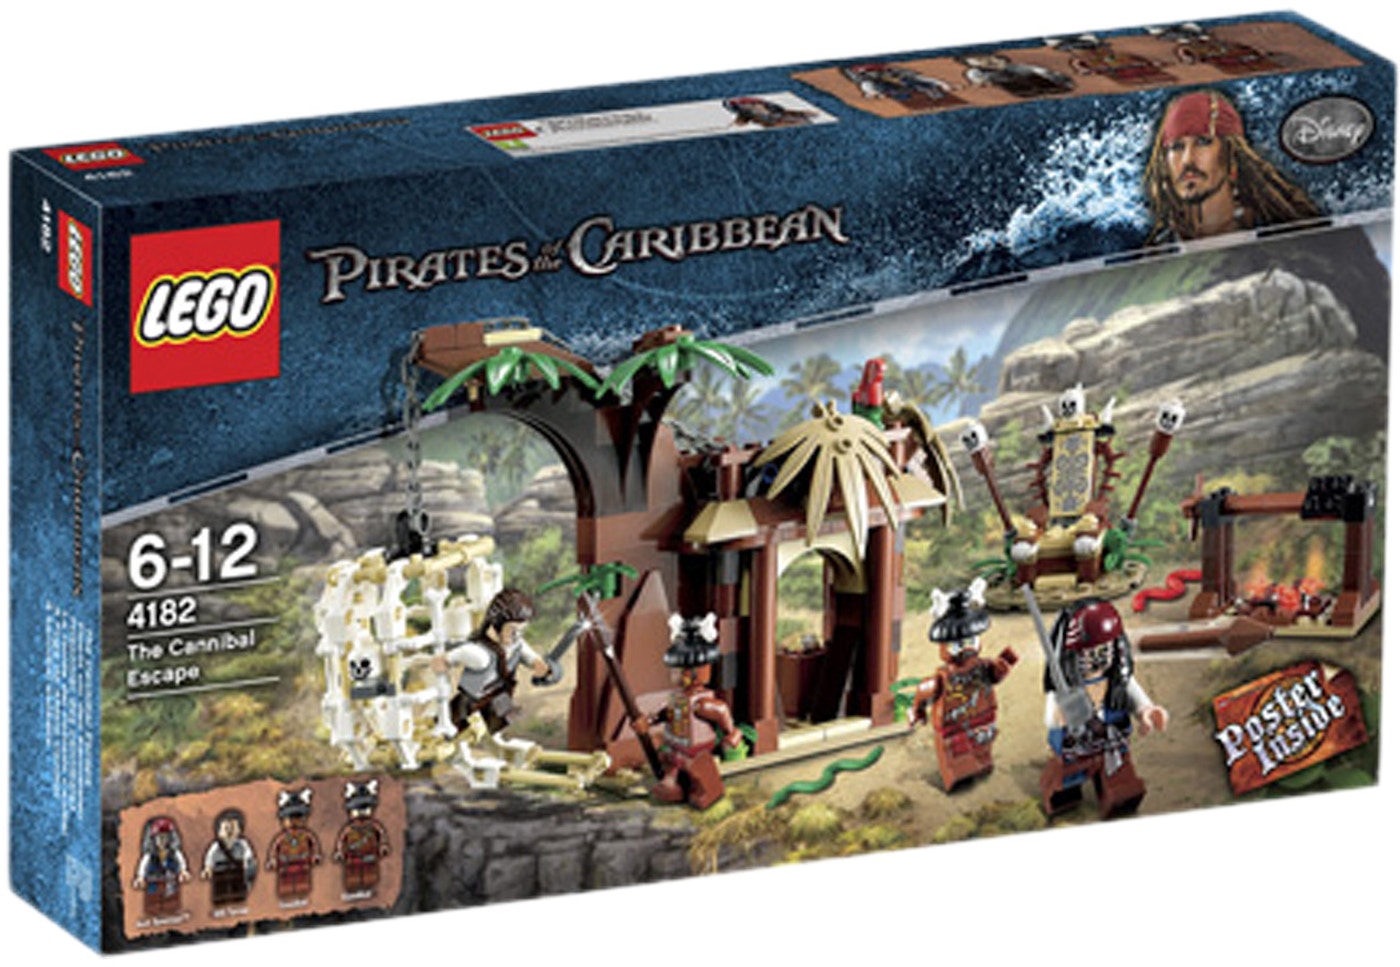 lego-pirates-of-the-caribbean-the-cannibal-escape-set-4182